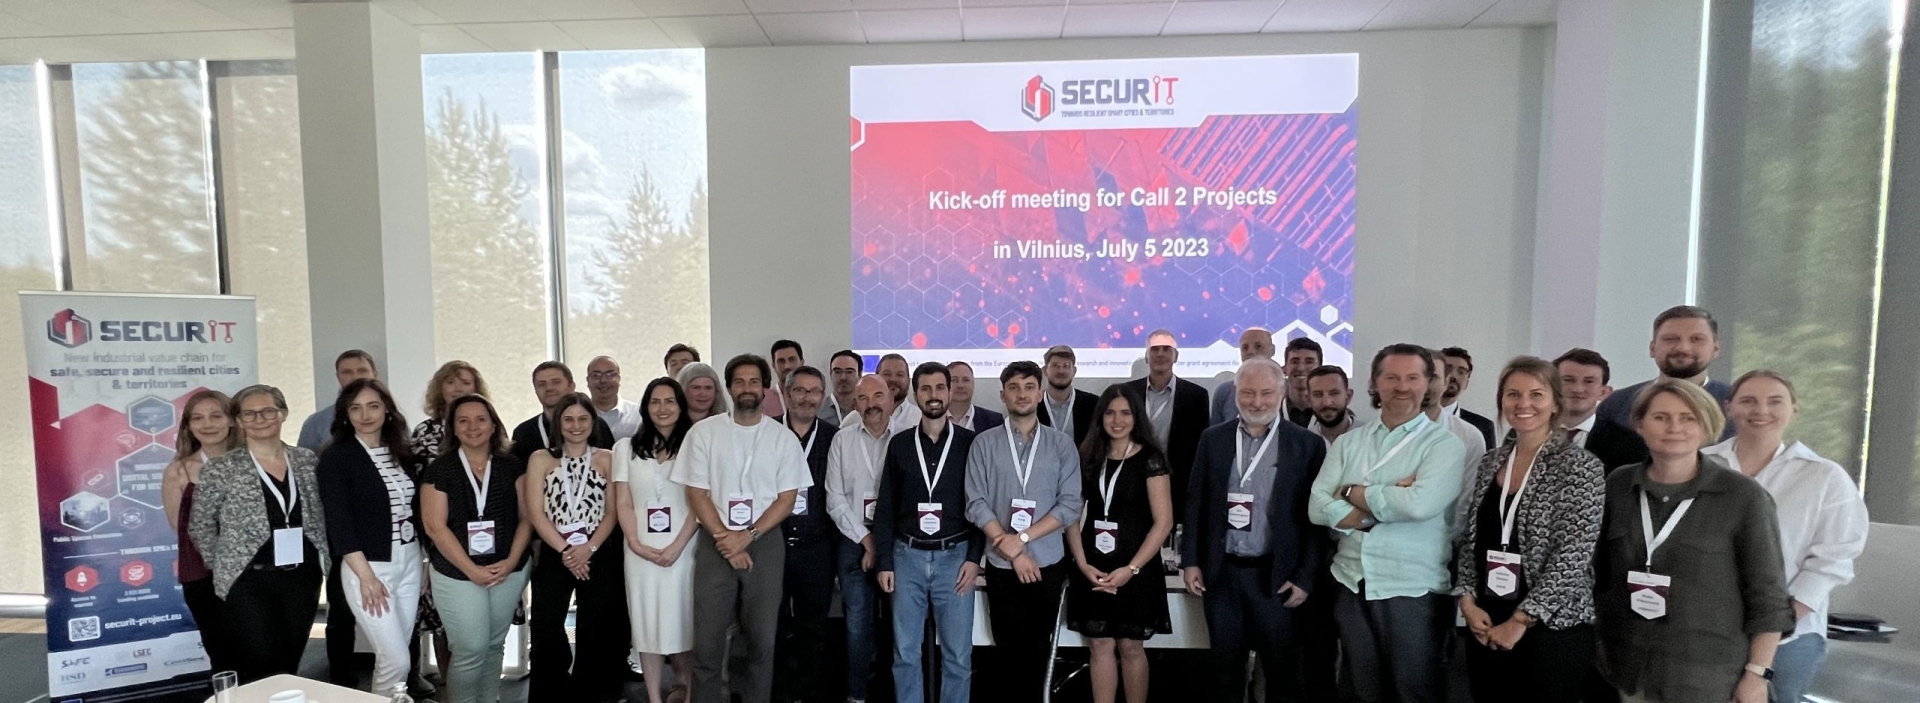 21 SecurIT-funded Projects Revealed - Two Projects with Dutch Involvement